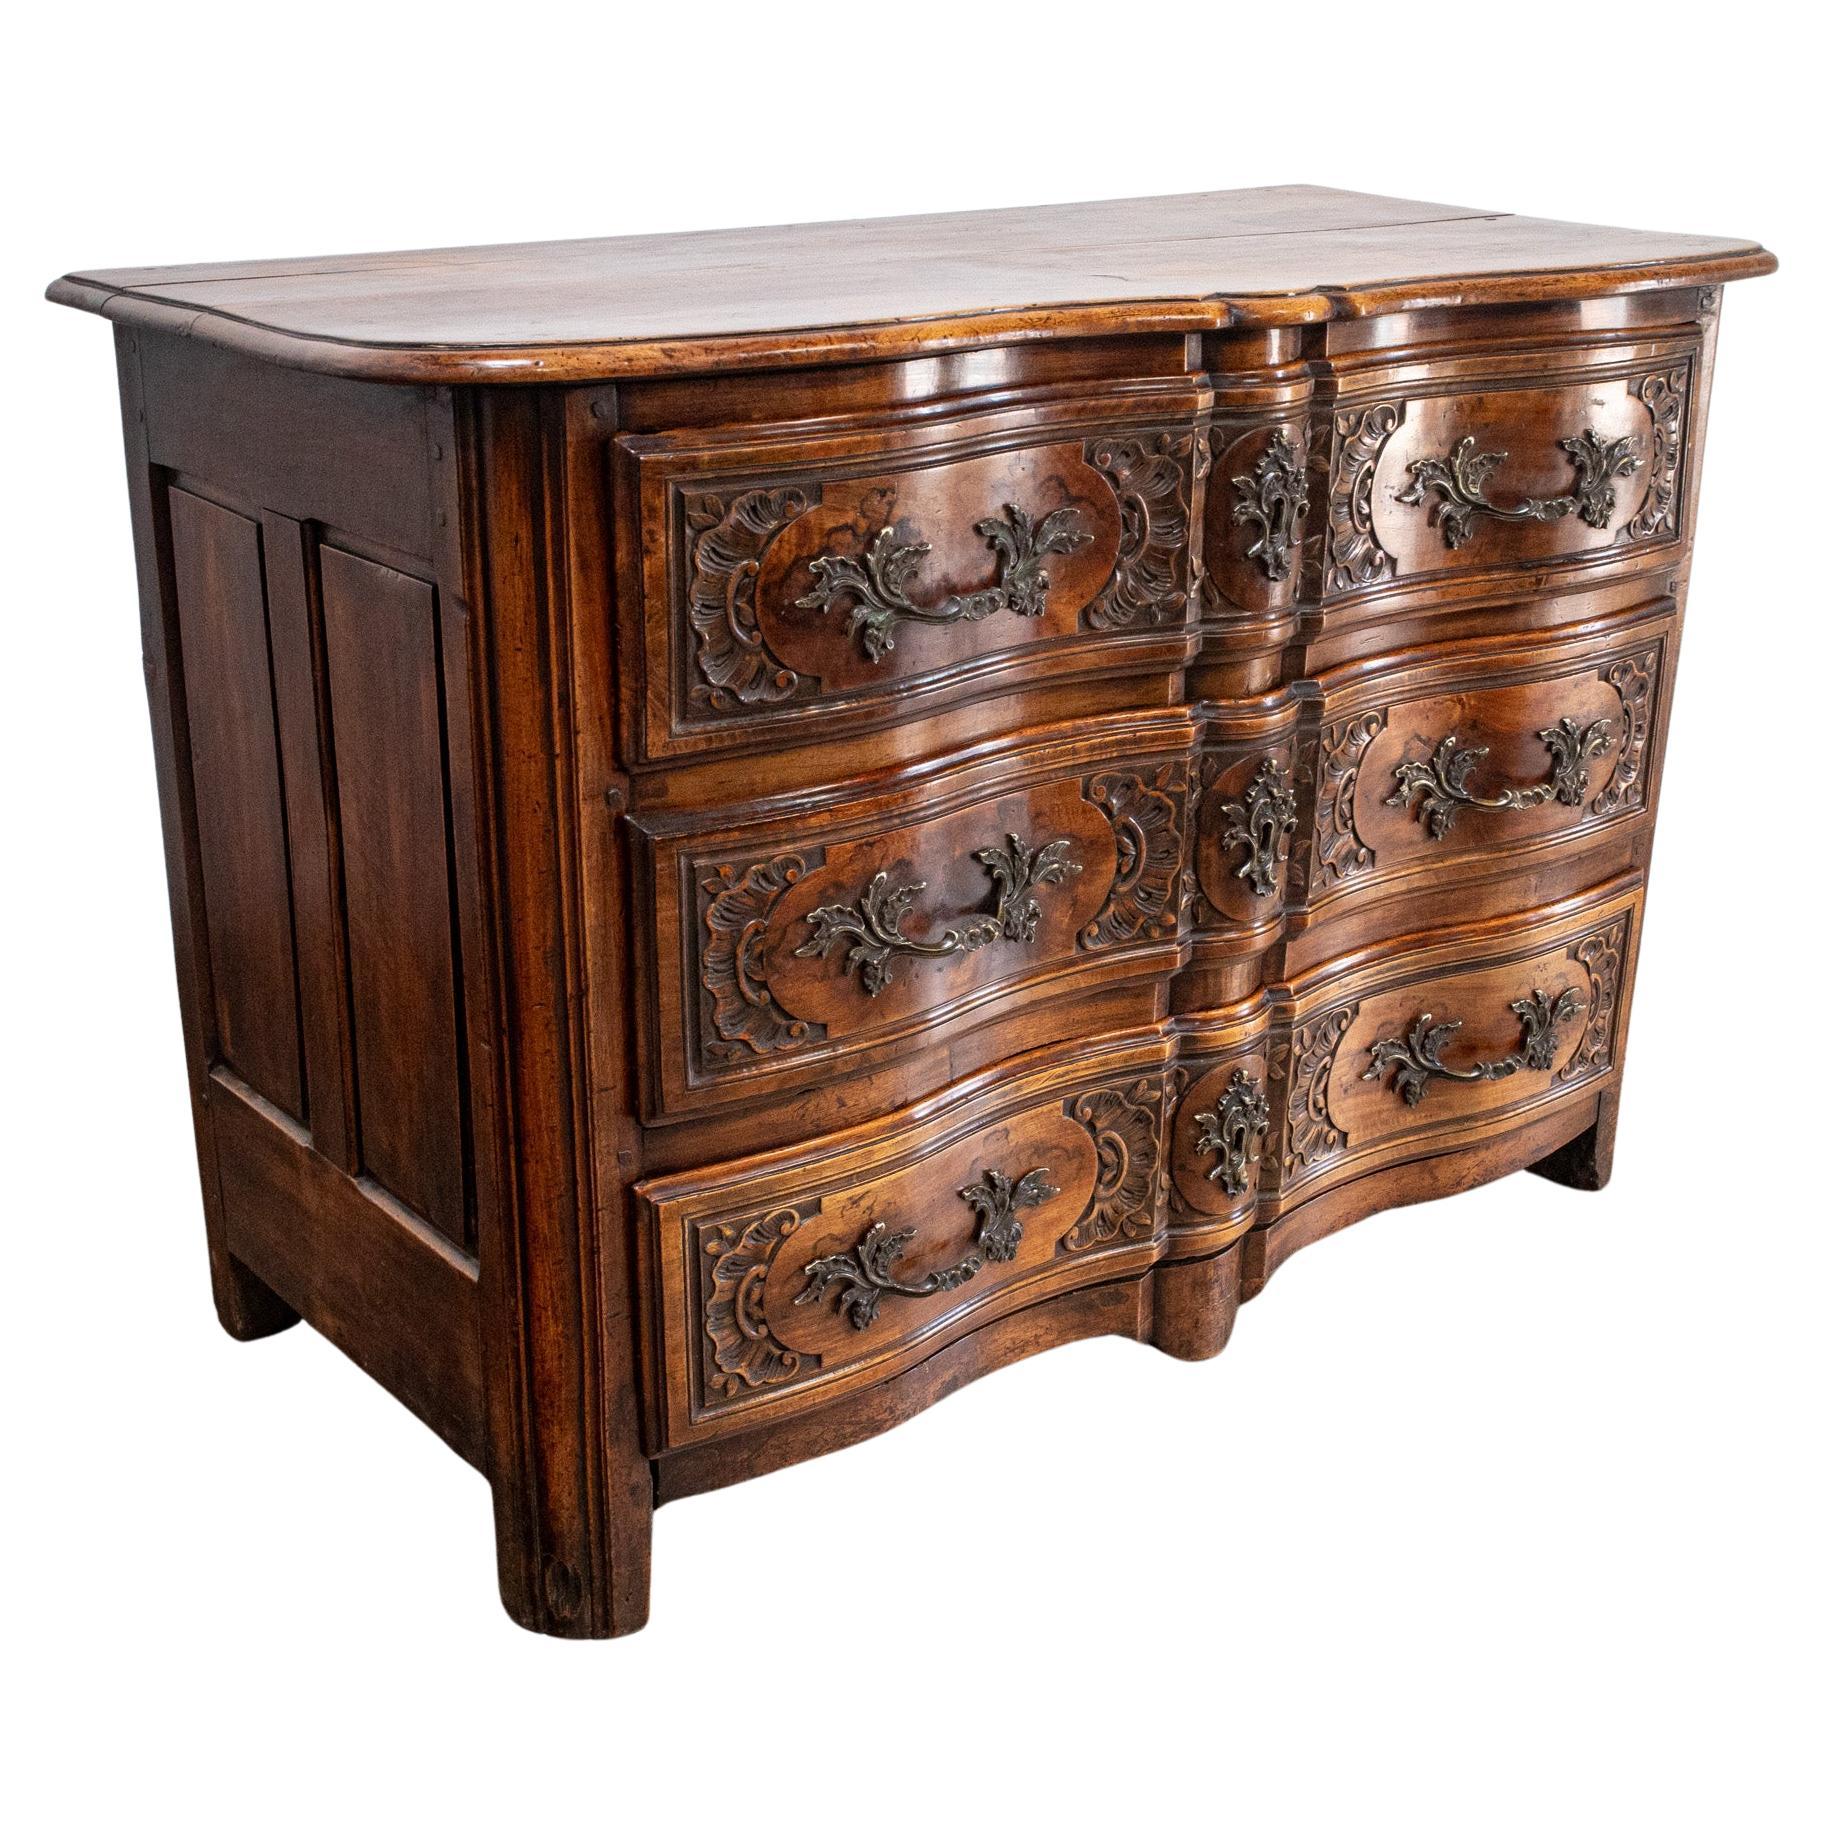 French Régence 18th Century Walnut Commode or Chest of Drawers For Sale